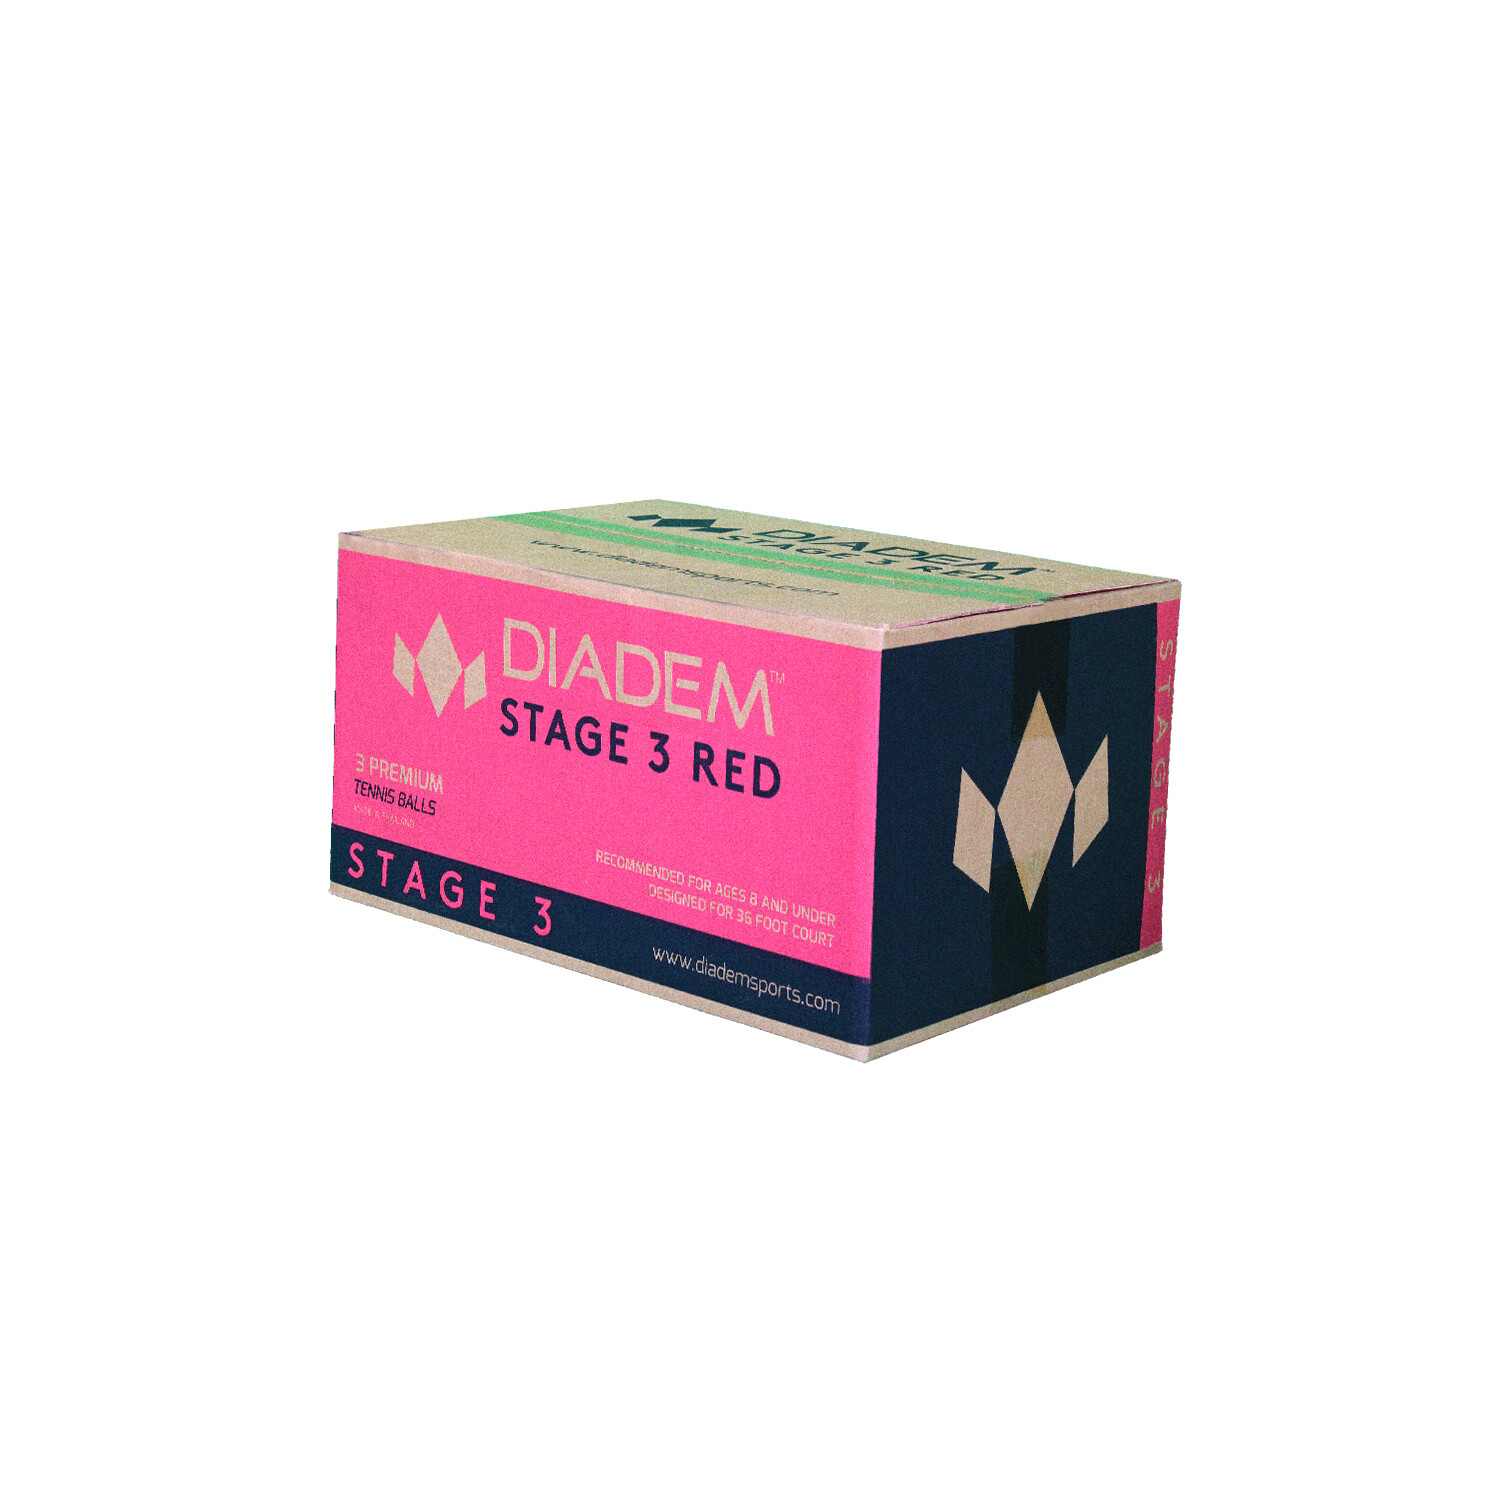 Diadem stage 3 red ball